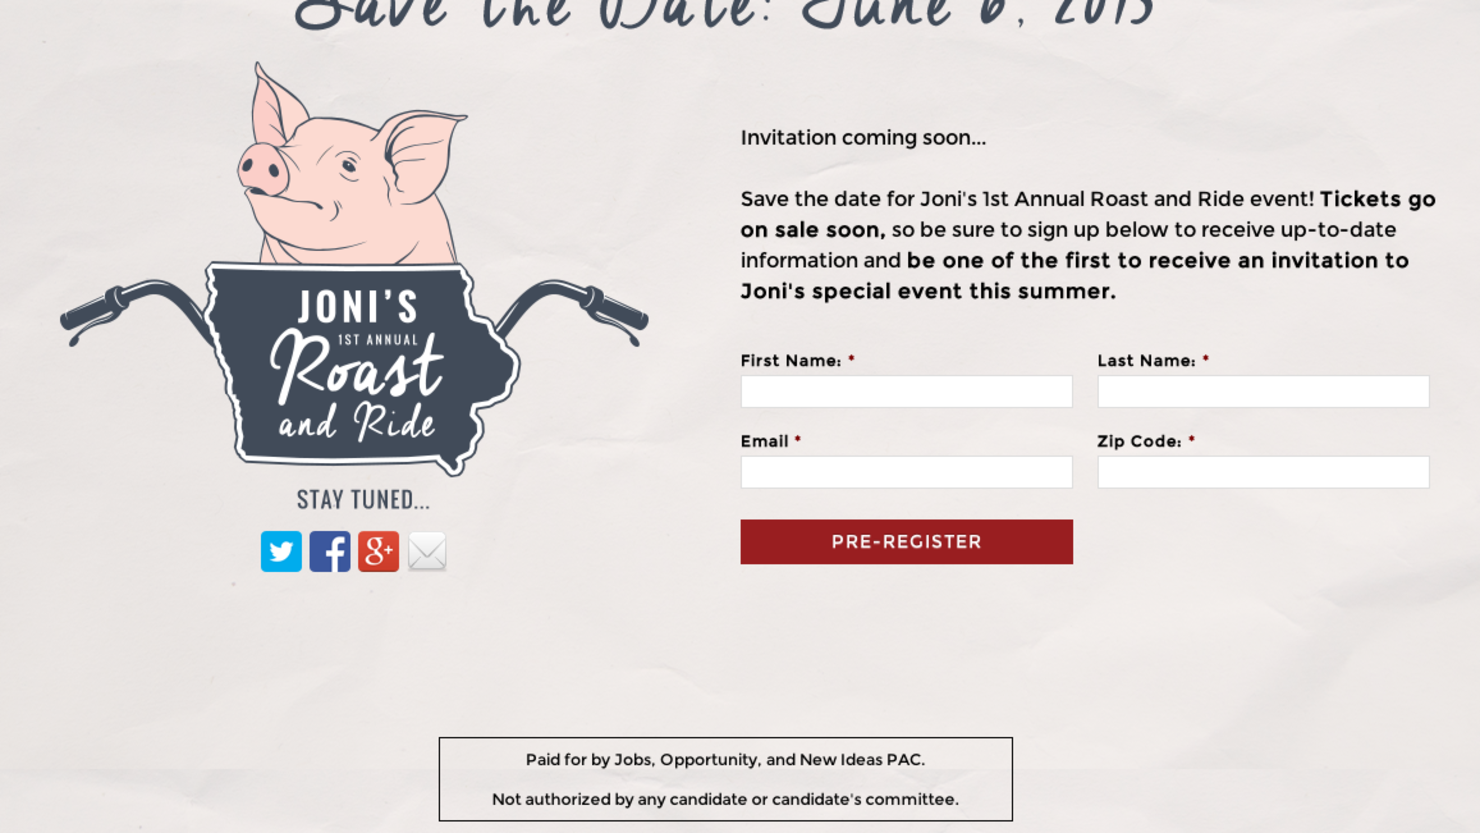 A screen shot of the invitation for Sen. Joni Ernst's 1st annual roast and ride fundraiser.